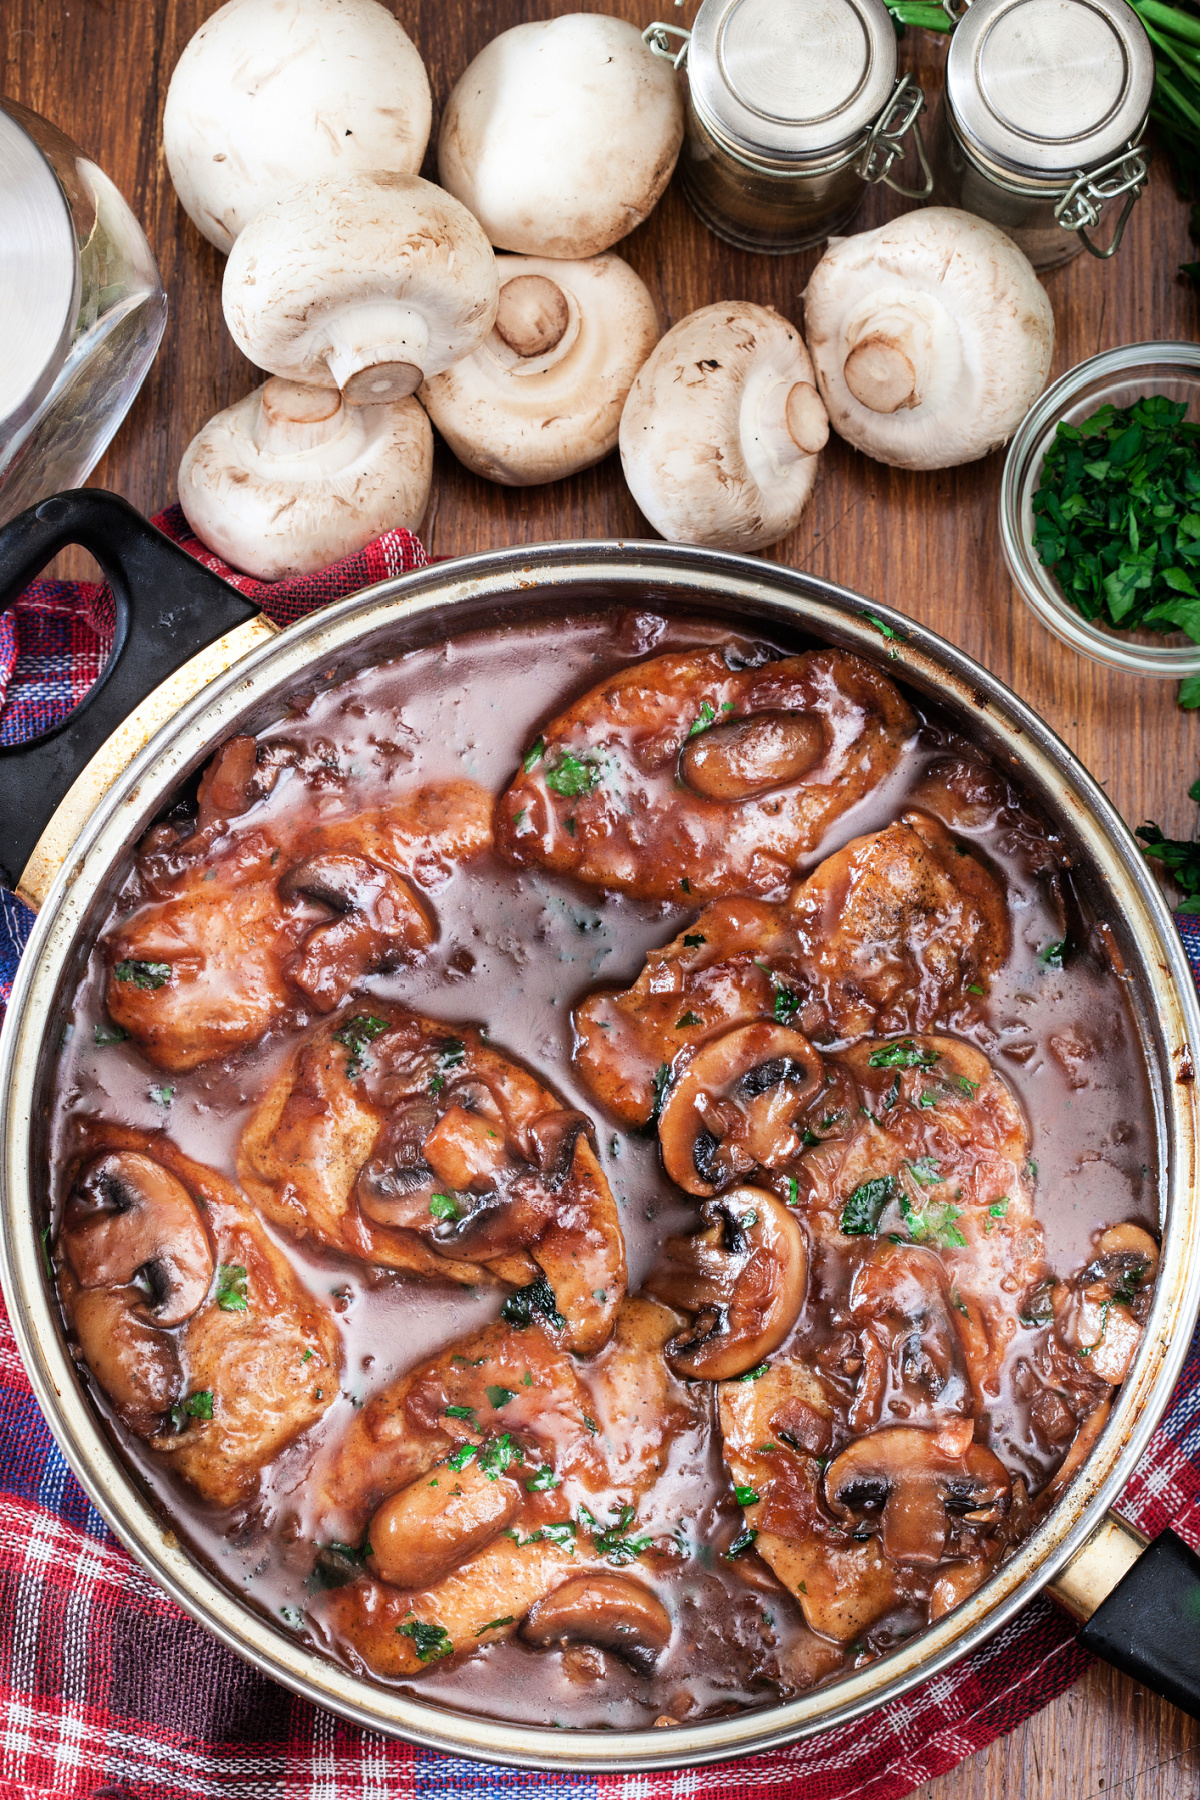 A delicious pan of sauteed chicken in a Marsala wine sauce